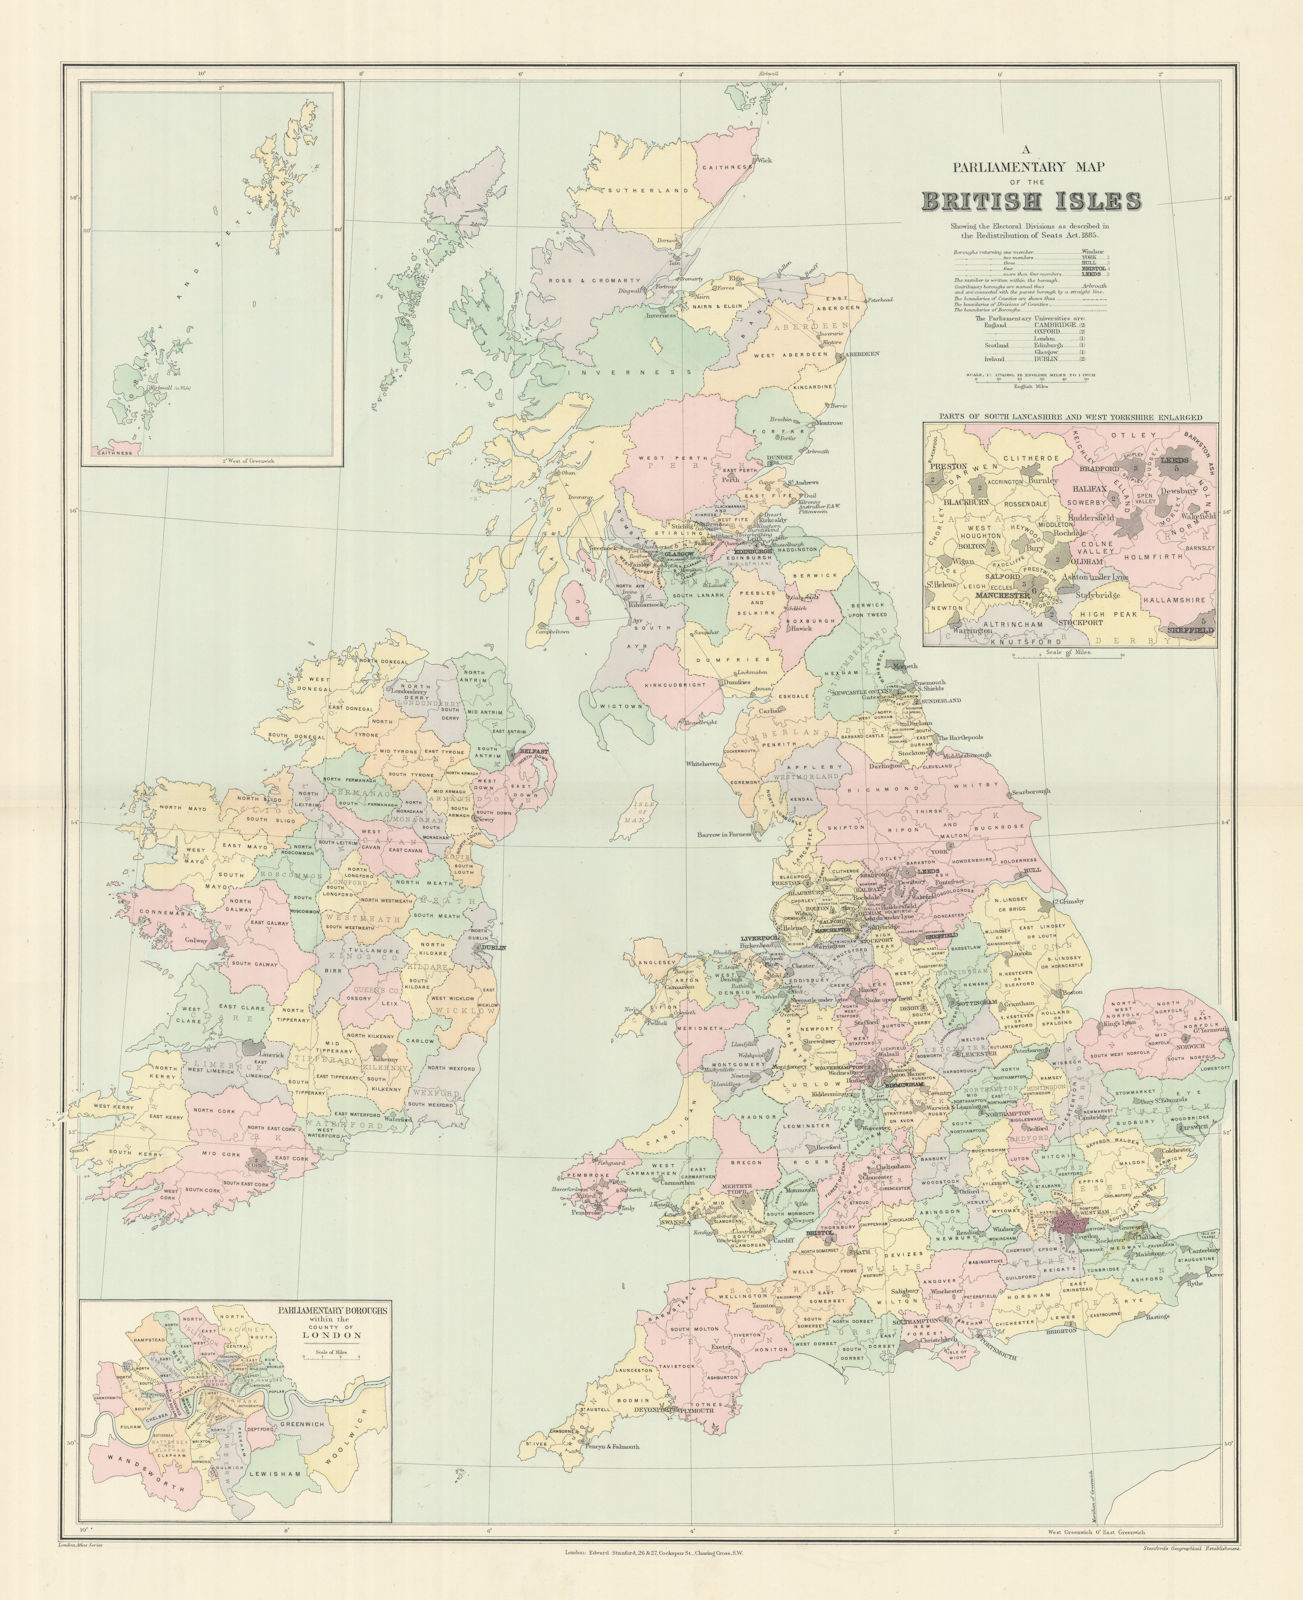 British Isles Parliamentary constituencies. Large 64x51cm. STANFORD 1894 map